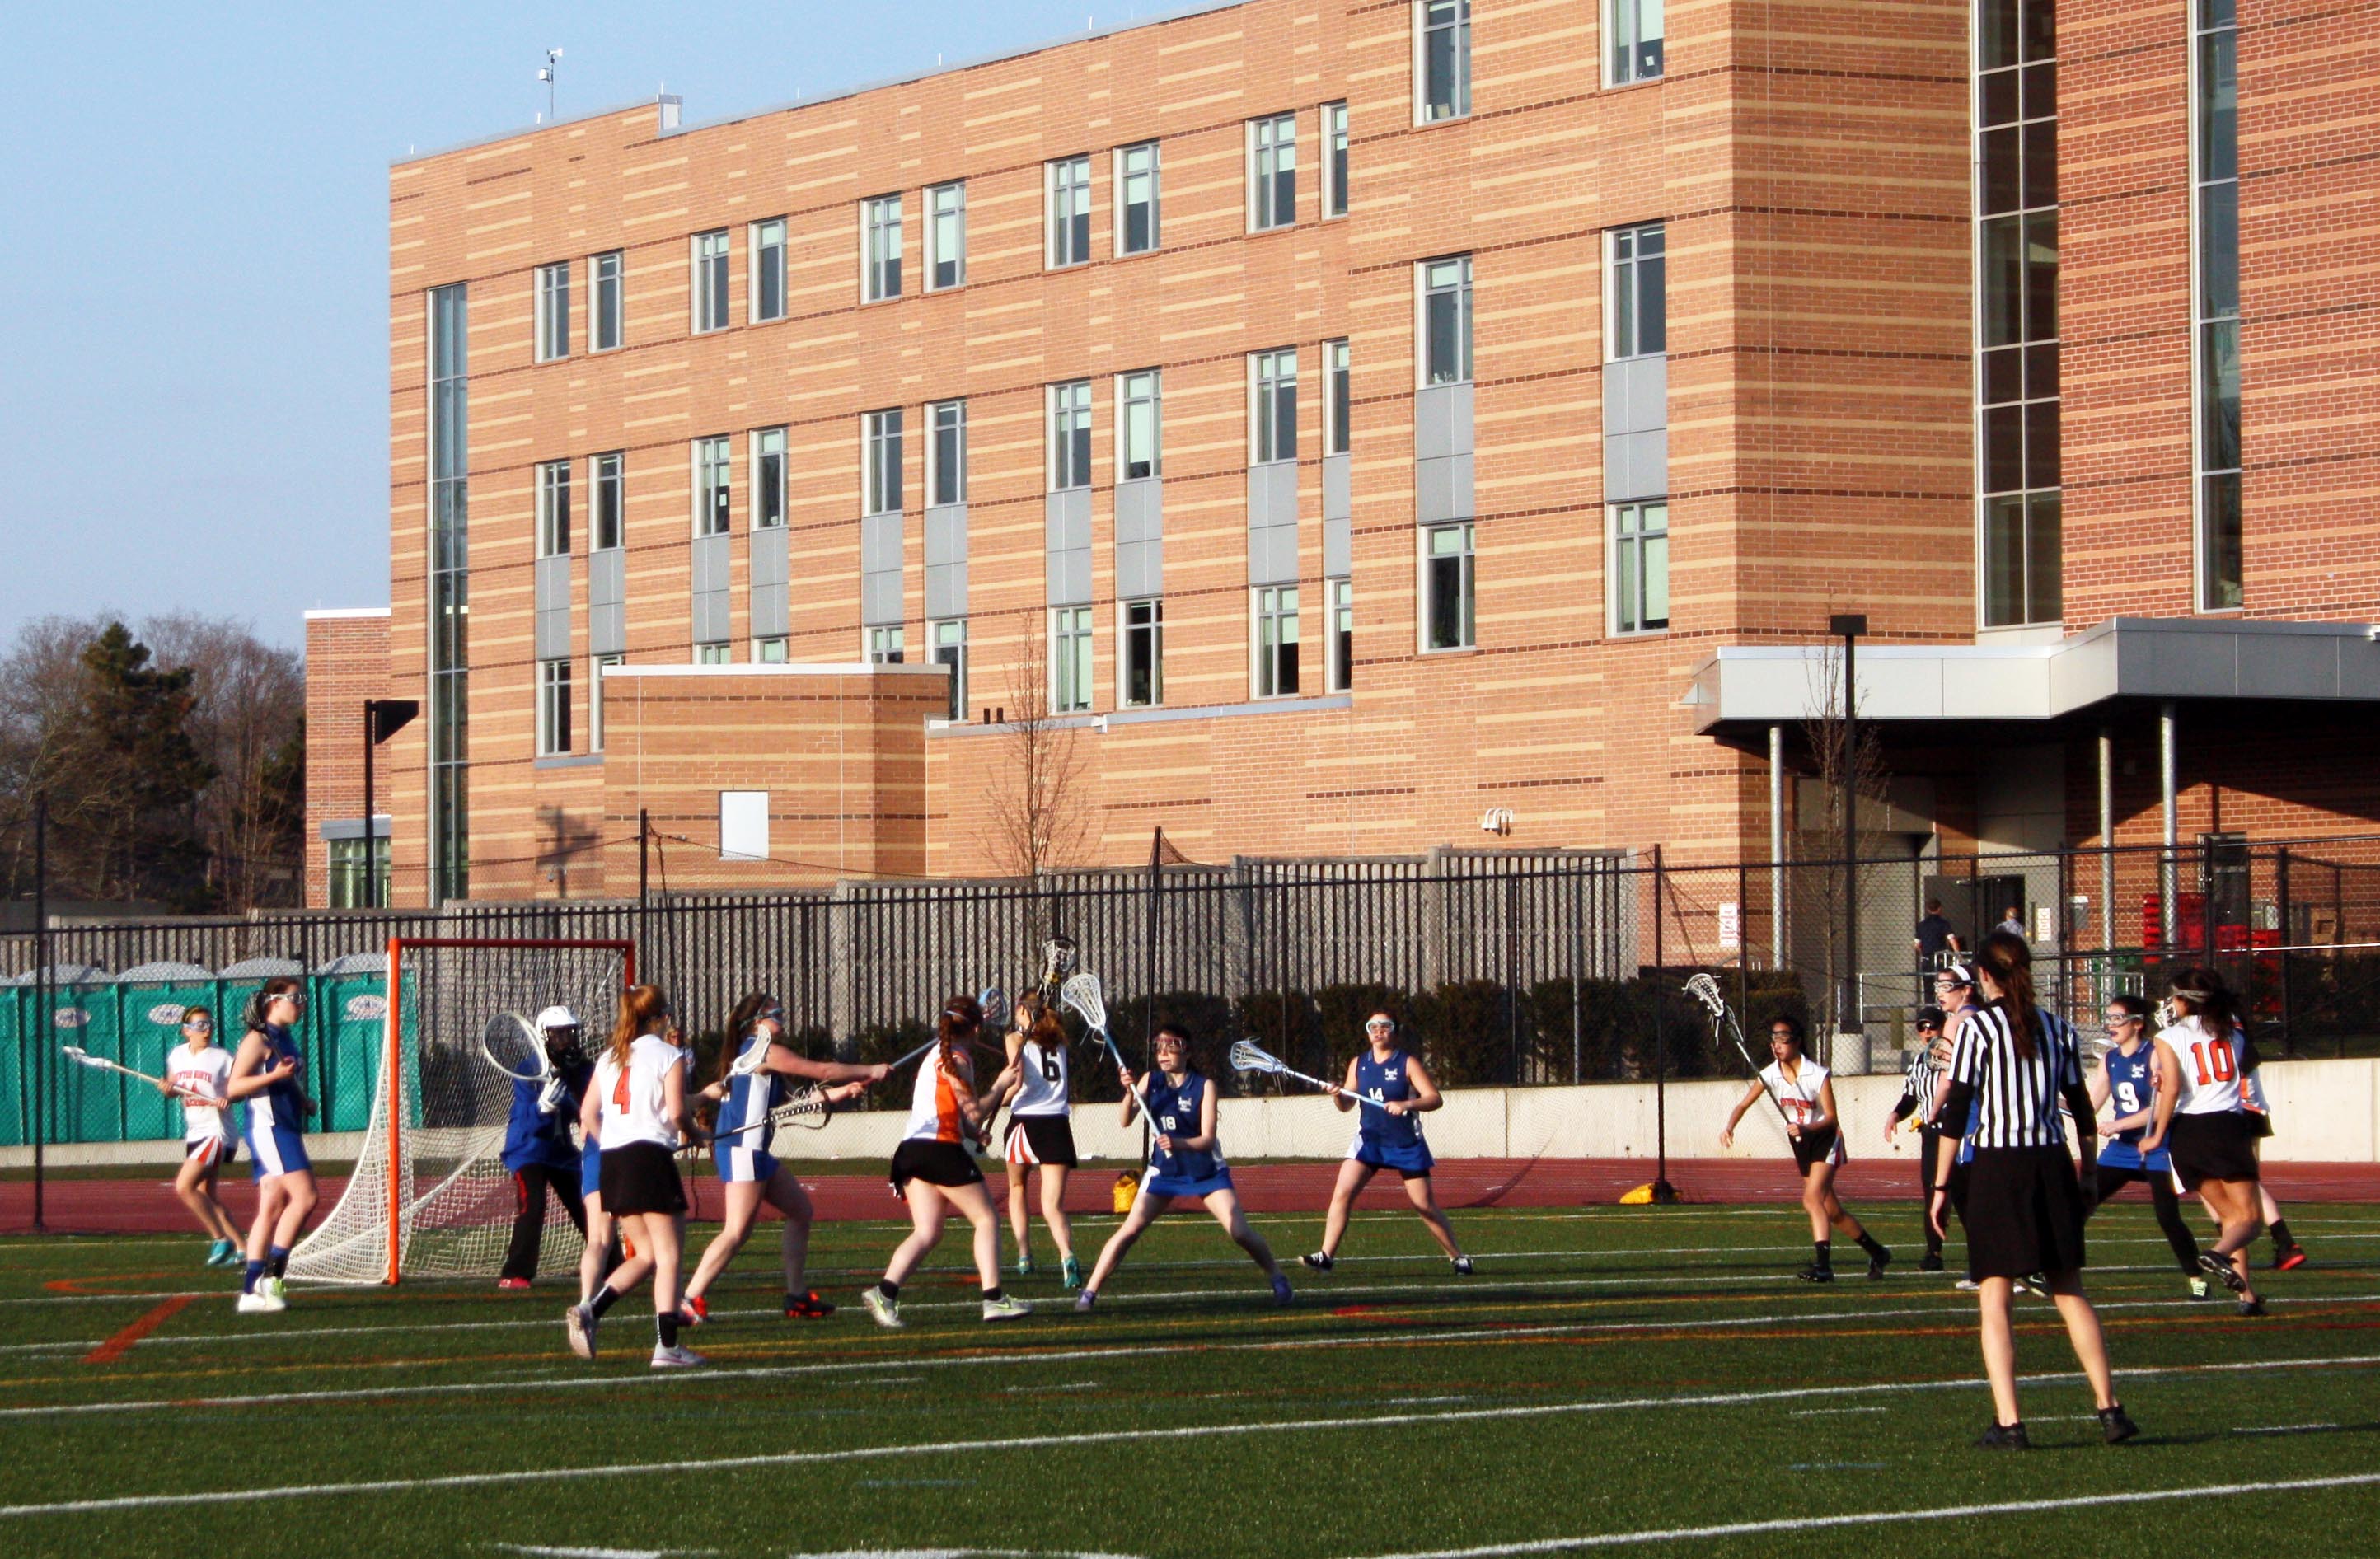 The Girls' Lacrosse team practices for a game.